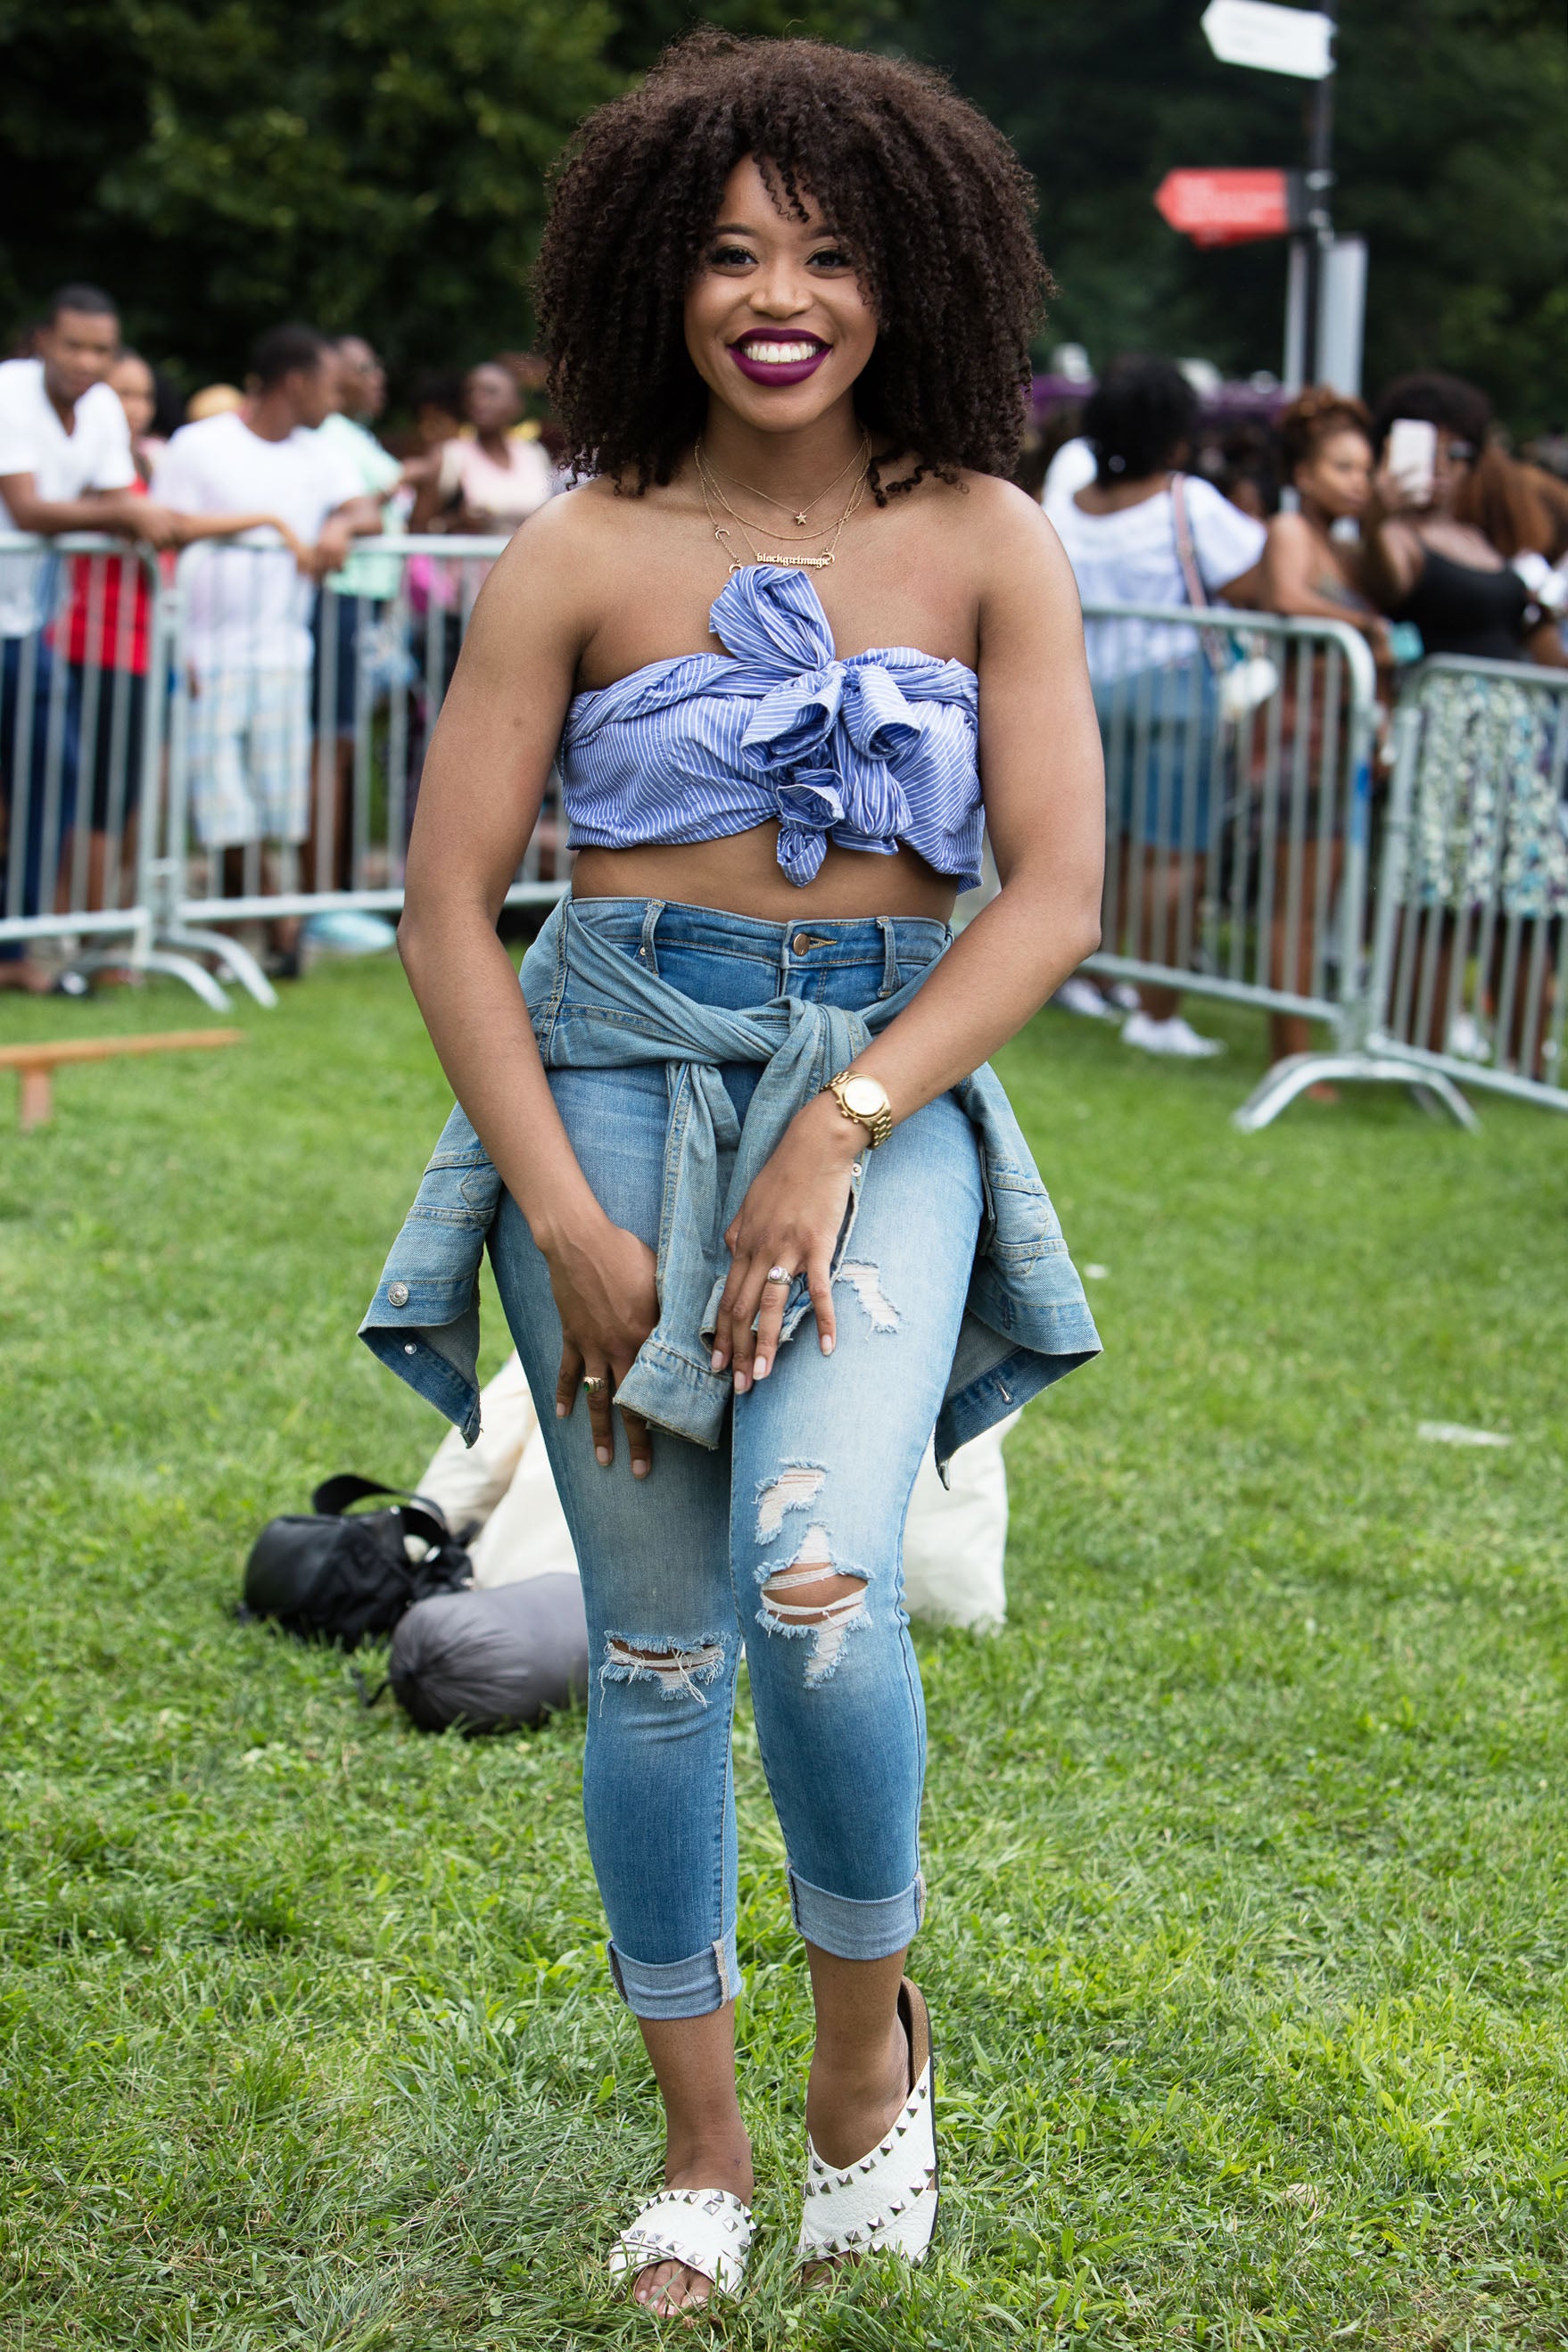 These Natural Beauties Delivered Stunning Style at the 2017 CurlFest
